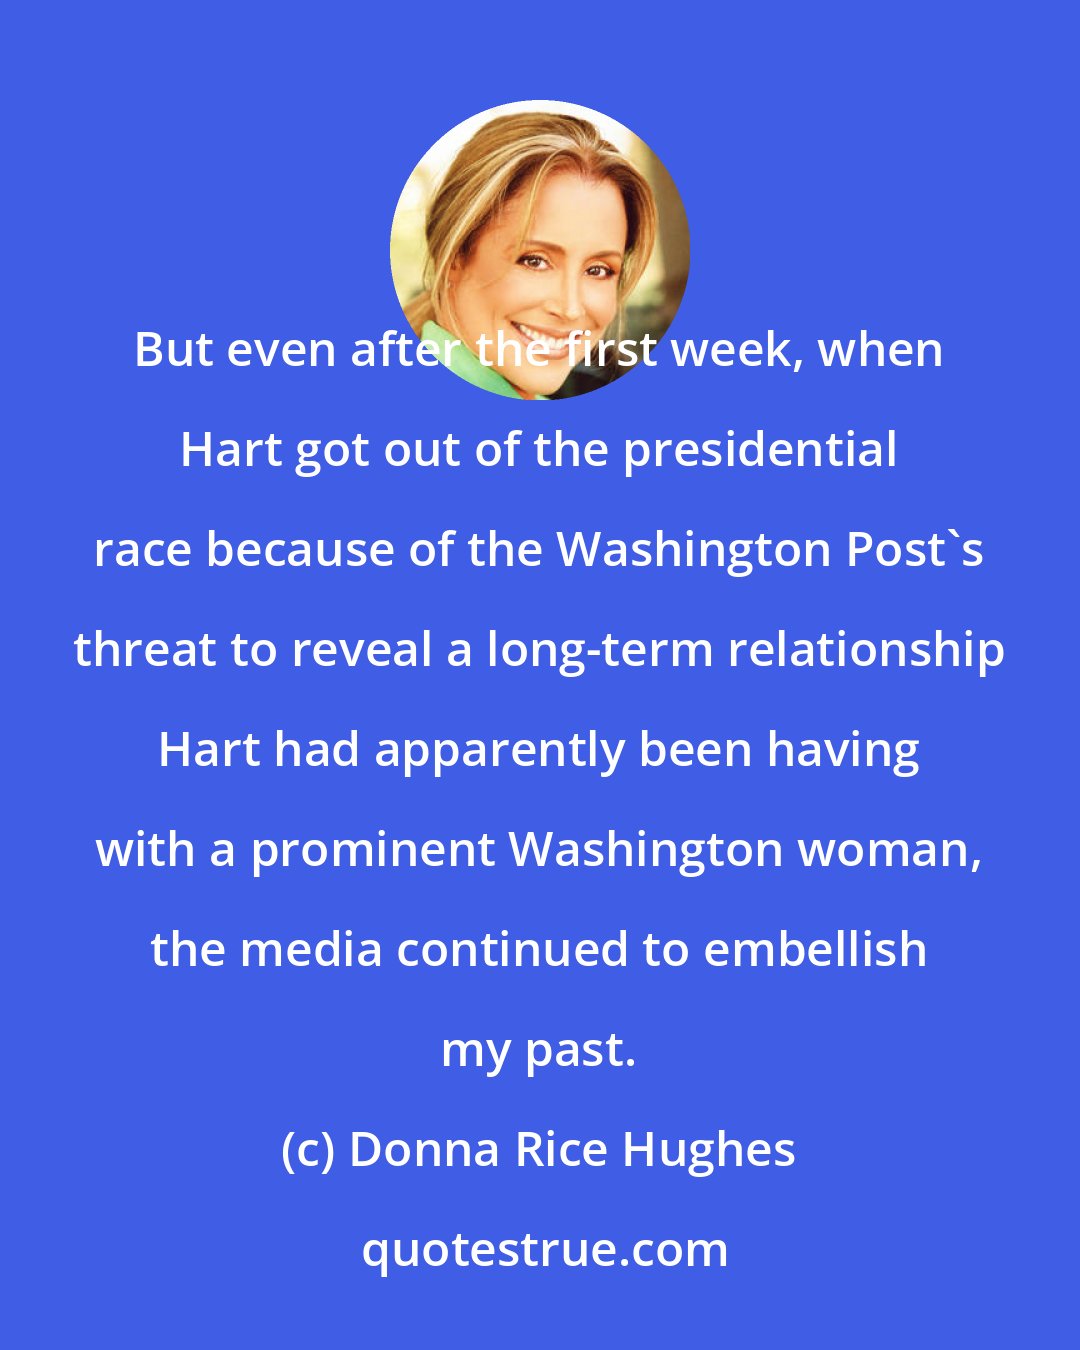 Donna Rice Hughes: But even after the first week, when Hart got out of the presidential race because of the Washington Post's threat to reveal a long-term relationship Hart had apparently been having with a prominent Washington woman, the media continued to embellish my past.